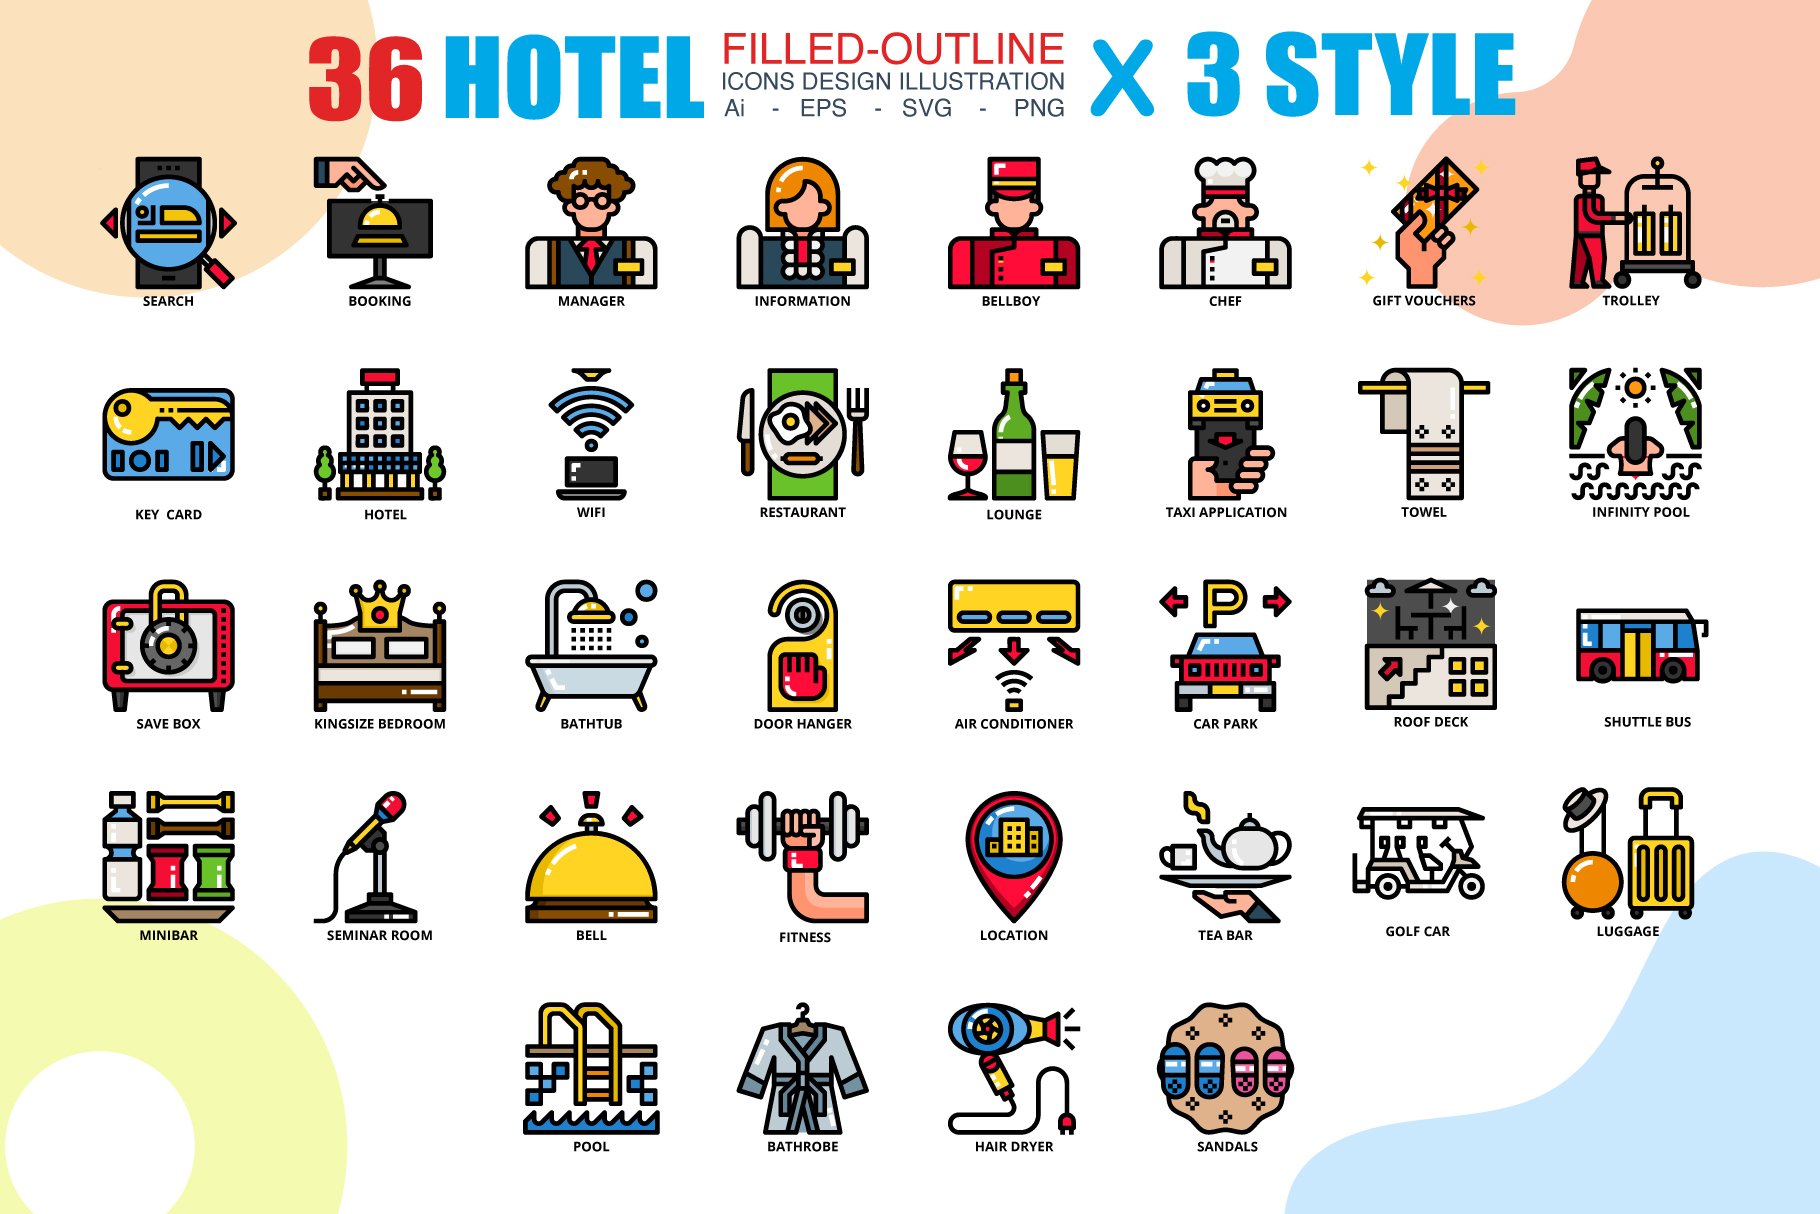 36 Hotel icons set x 3 Style cover image.